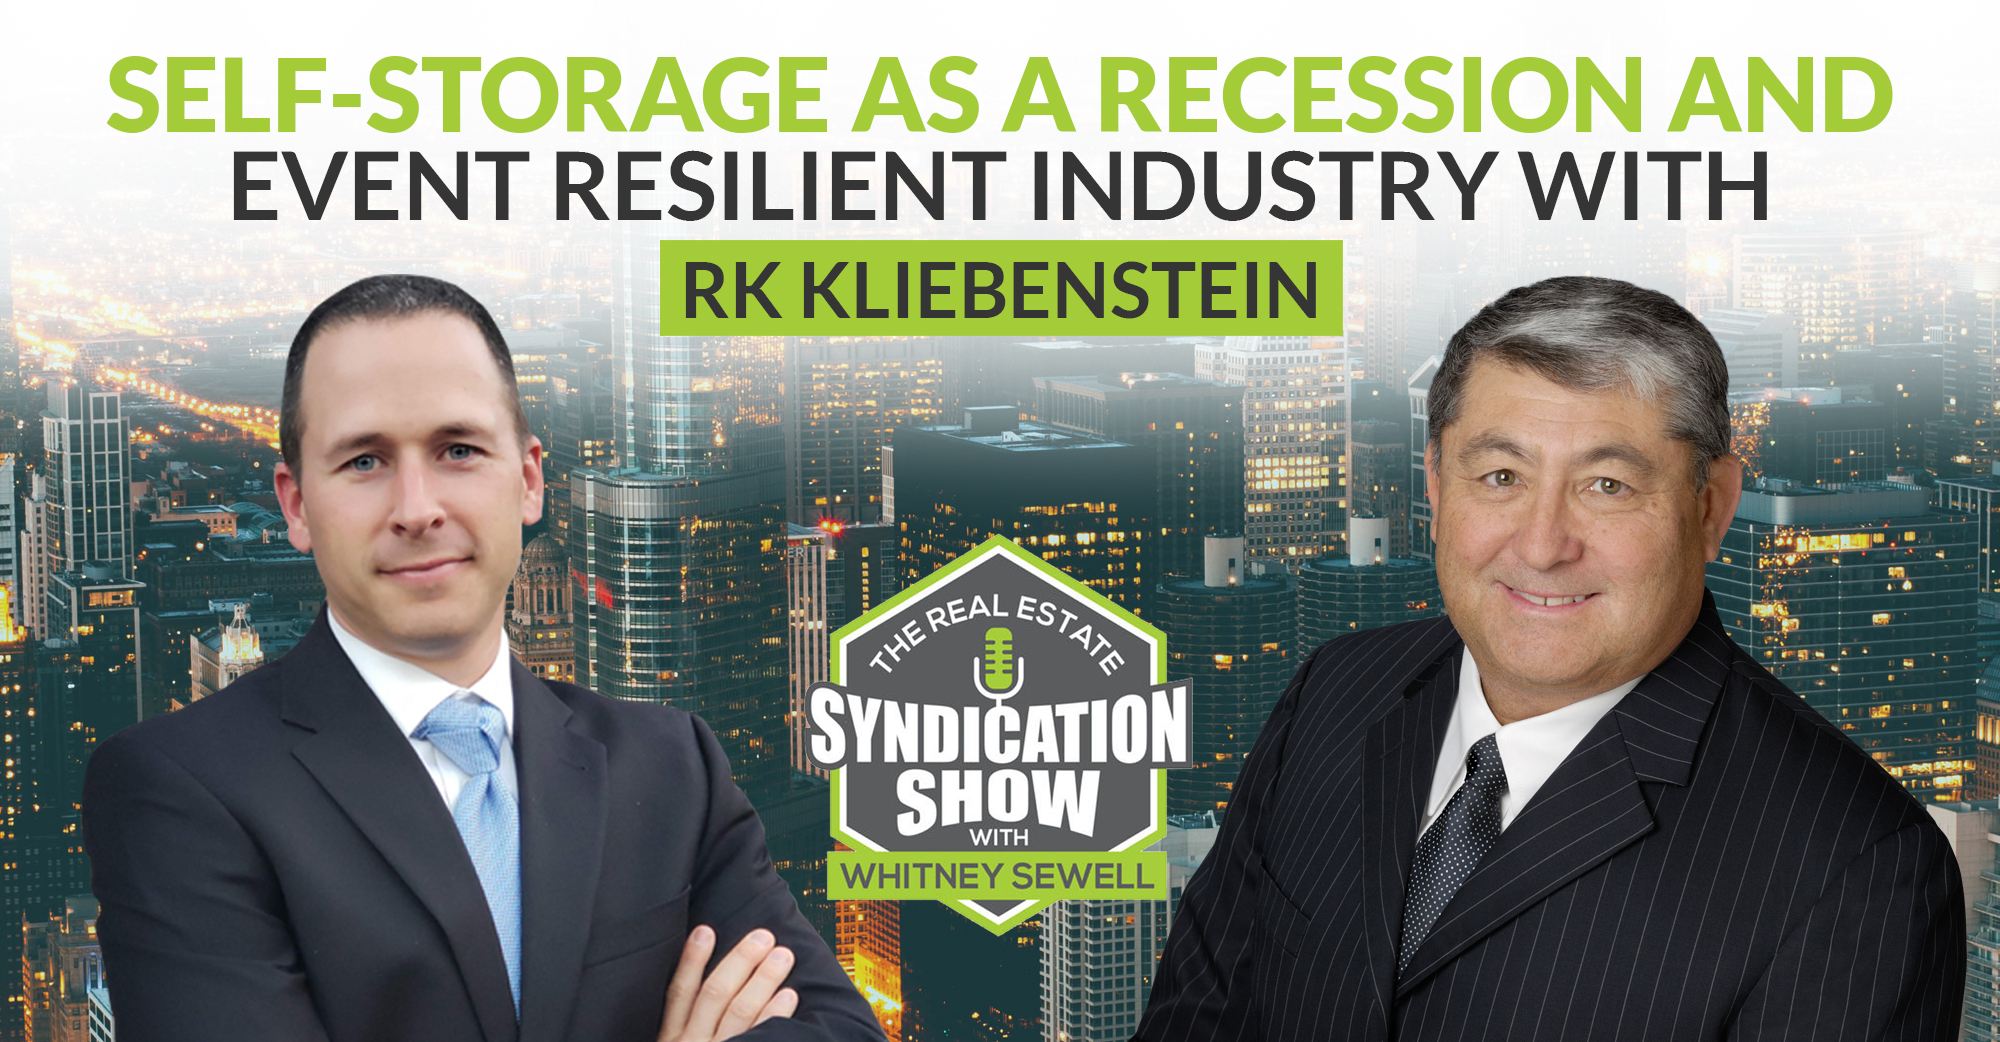 Self-Storage as Recession and Event Resilient Industry with RK Kliebenstein